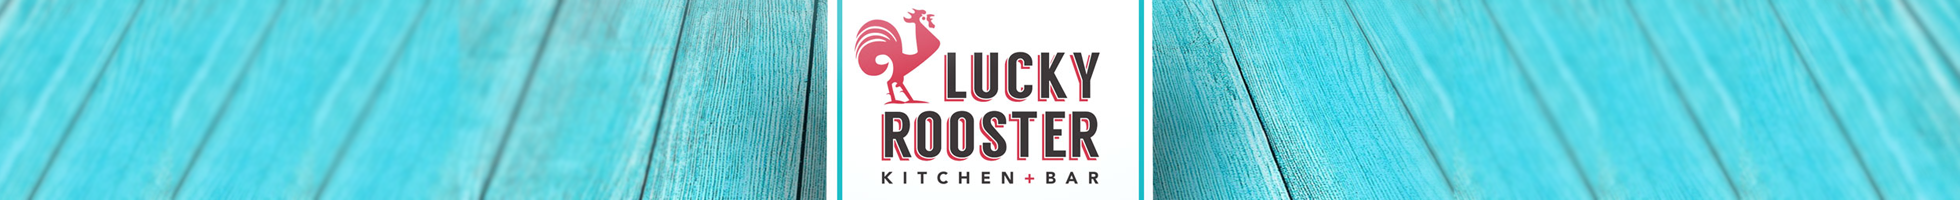 Lucky Rooster Kitchen + Bar